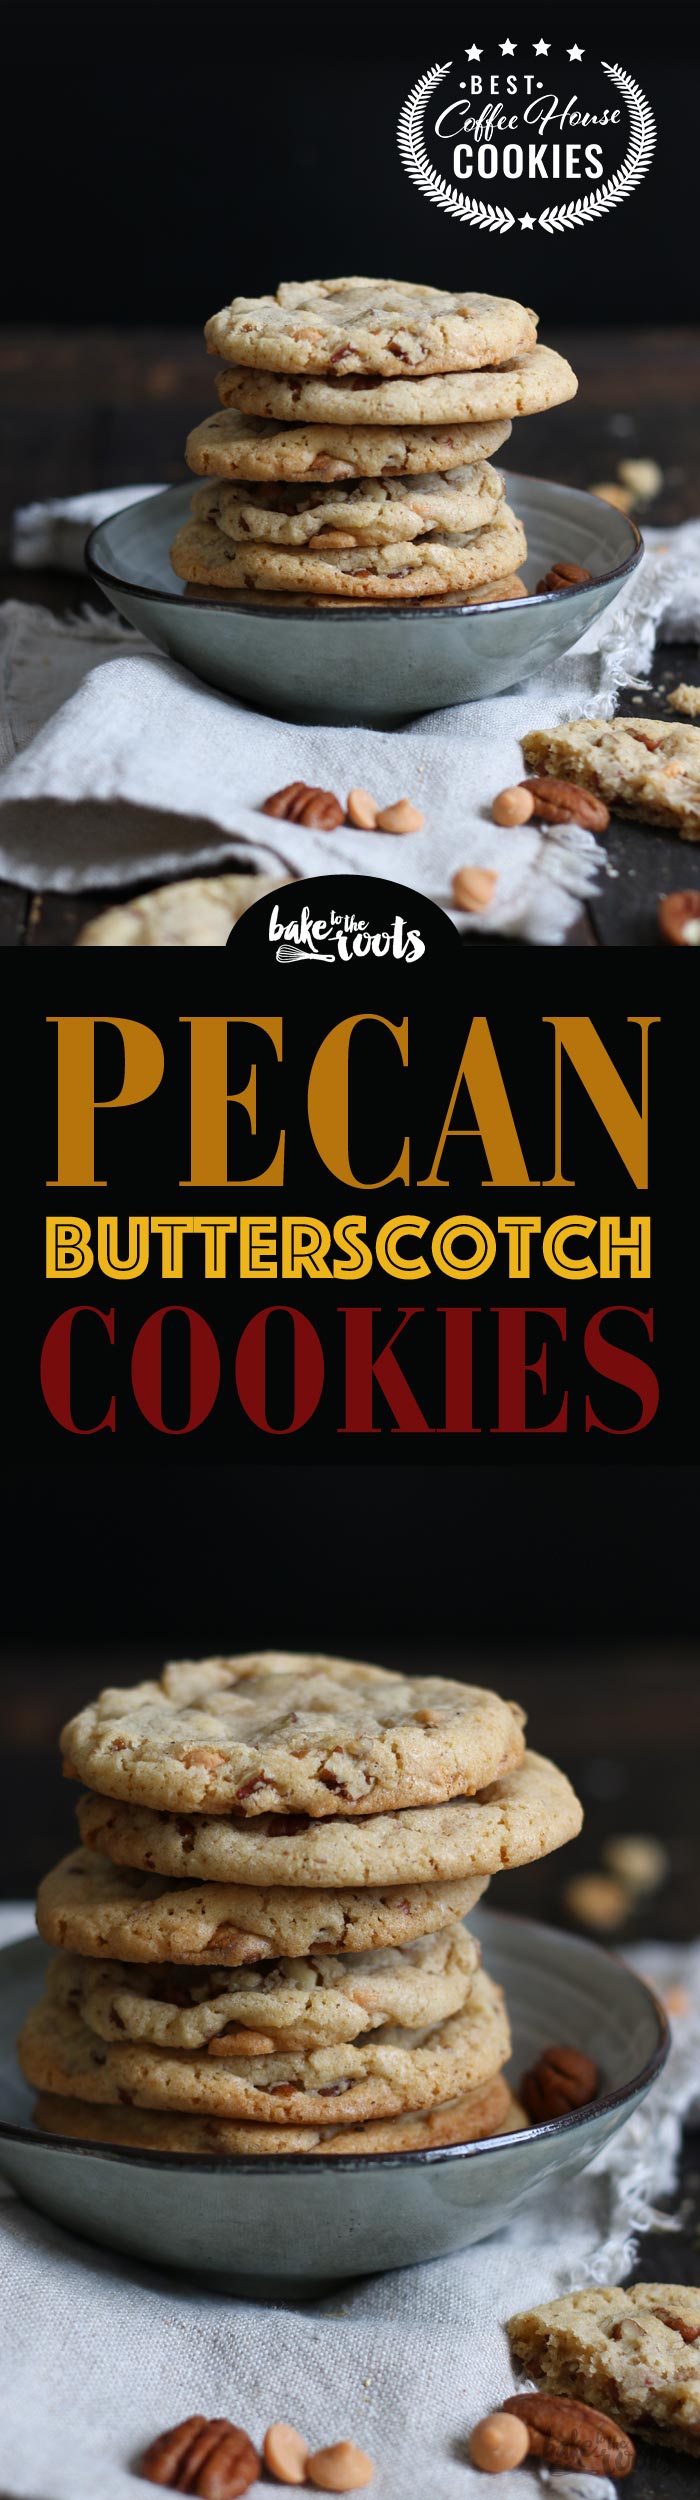 Pecan Butterscotch Cookies | Bake to the roots